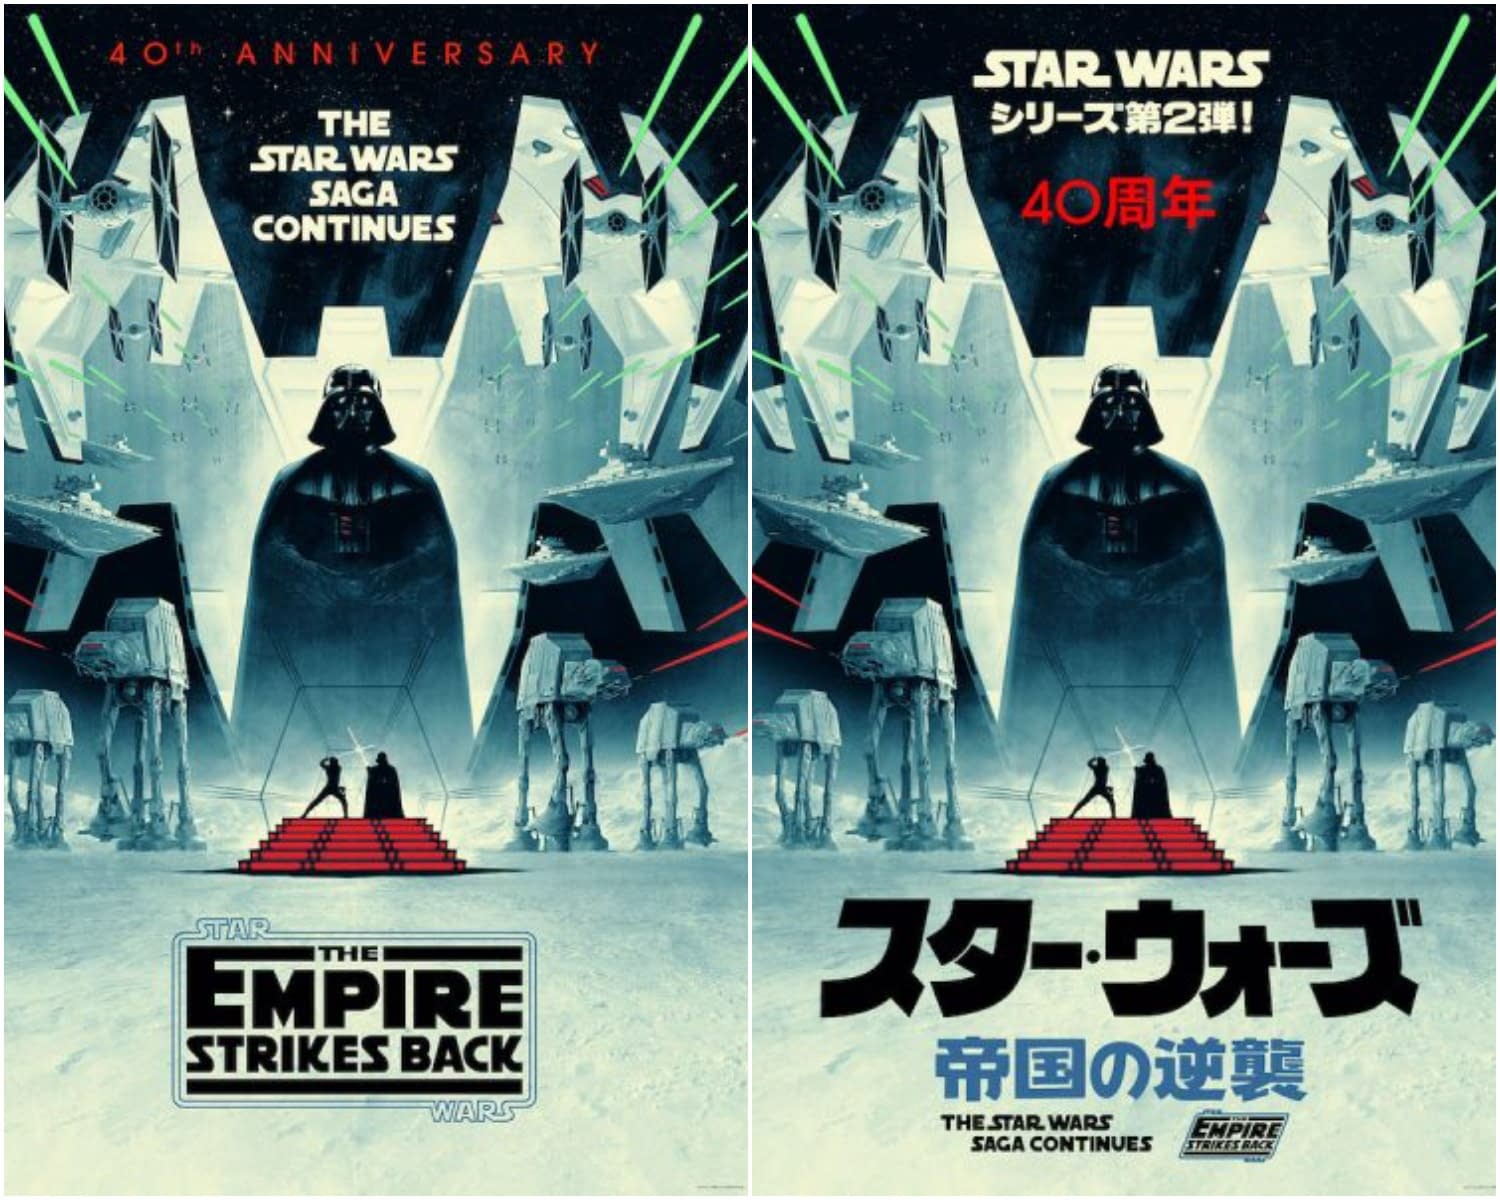 Star Wars Empire Strikes Back th Anniversary Posters Available Now